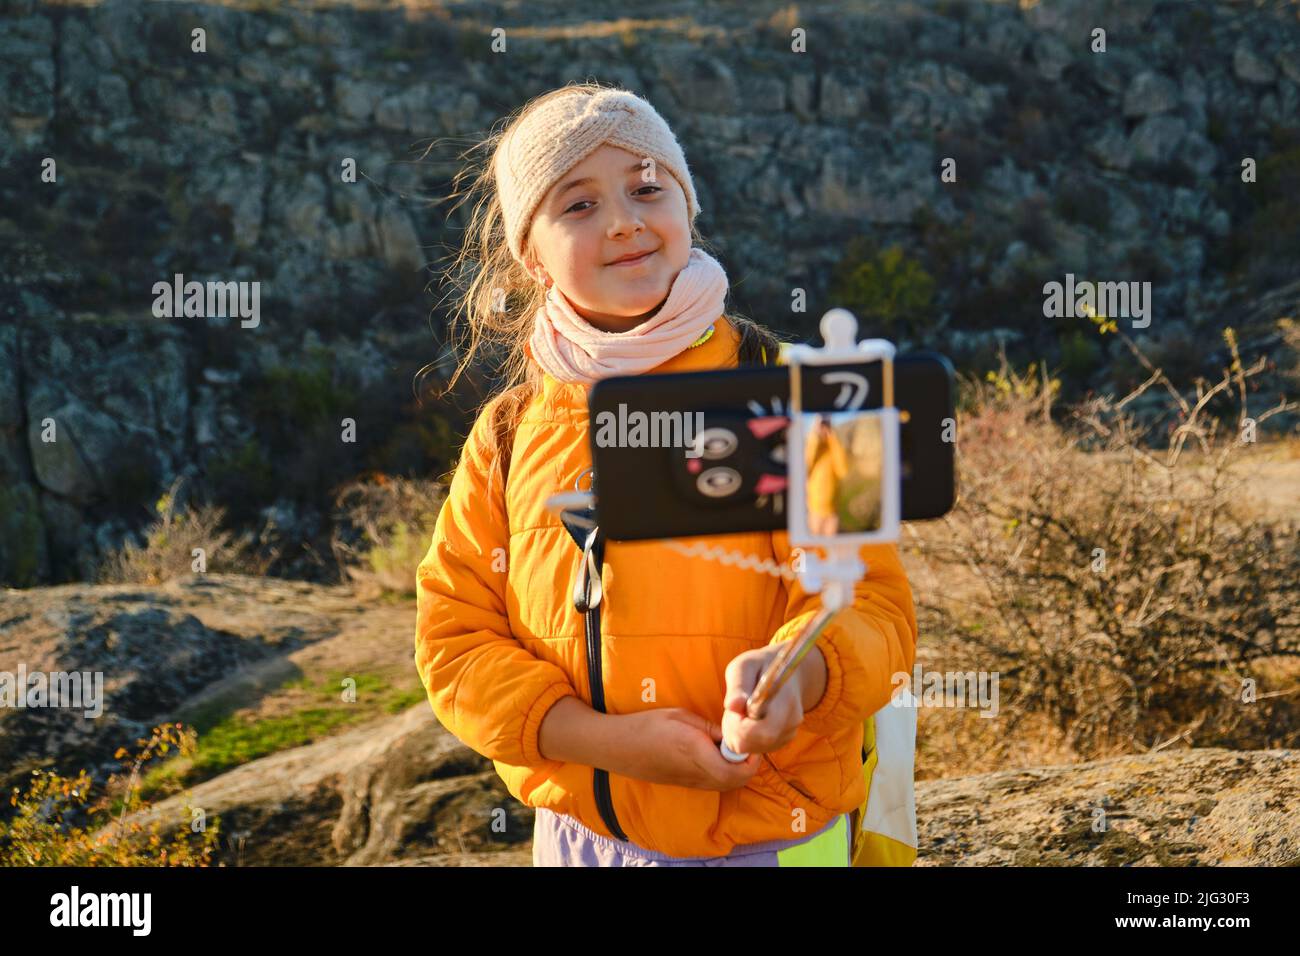 child vlogger filming daily video diary outdoors. kid creating social media content. Stock Photo